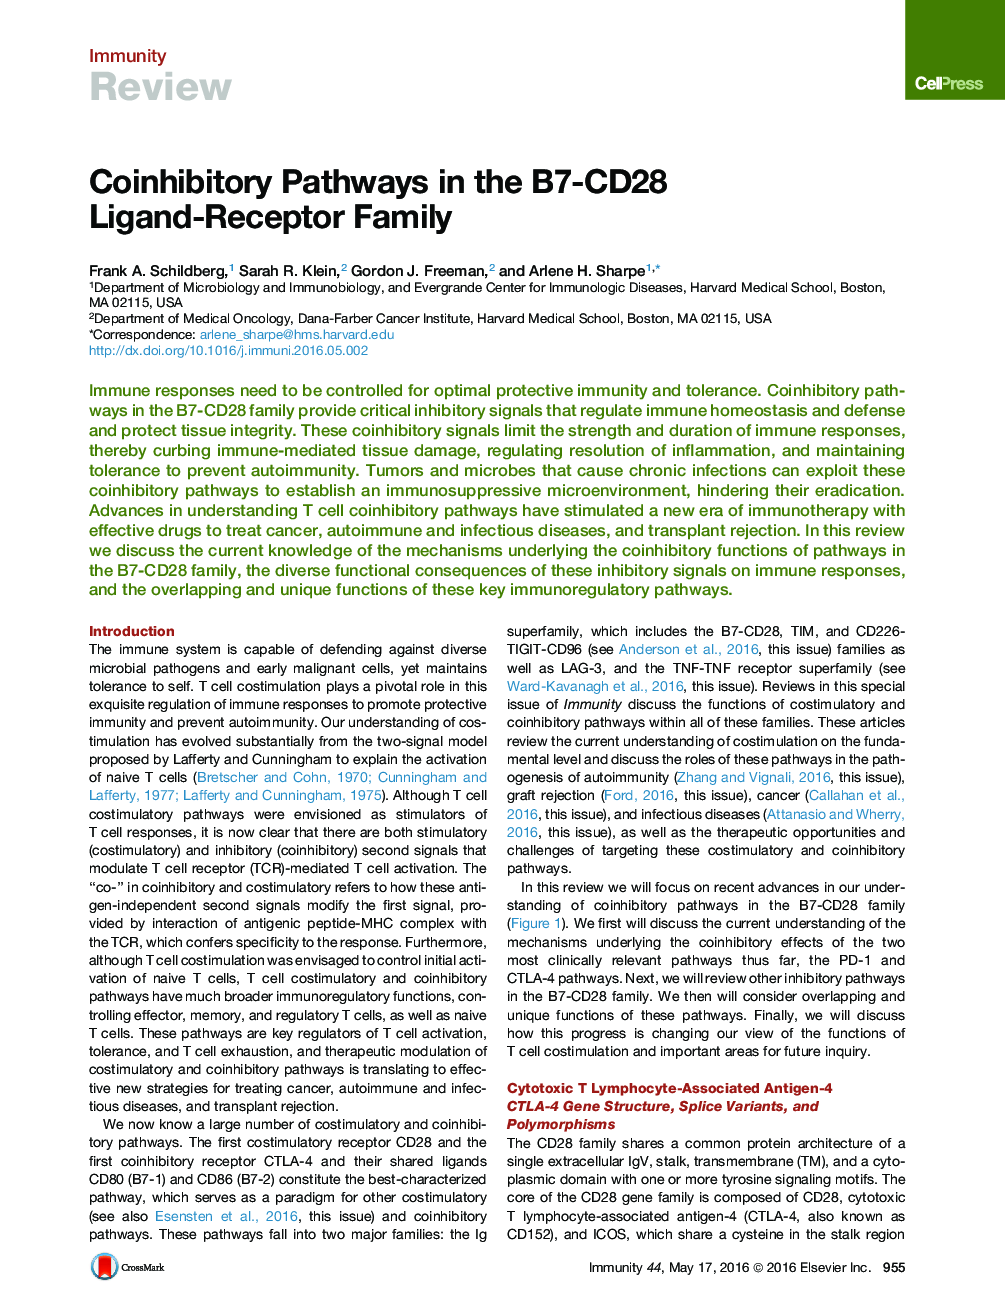 Coinhibitory Pathways in the B7-CD28 Ligand-Receptor Family